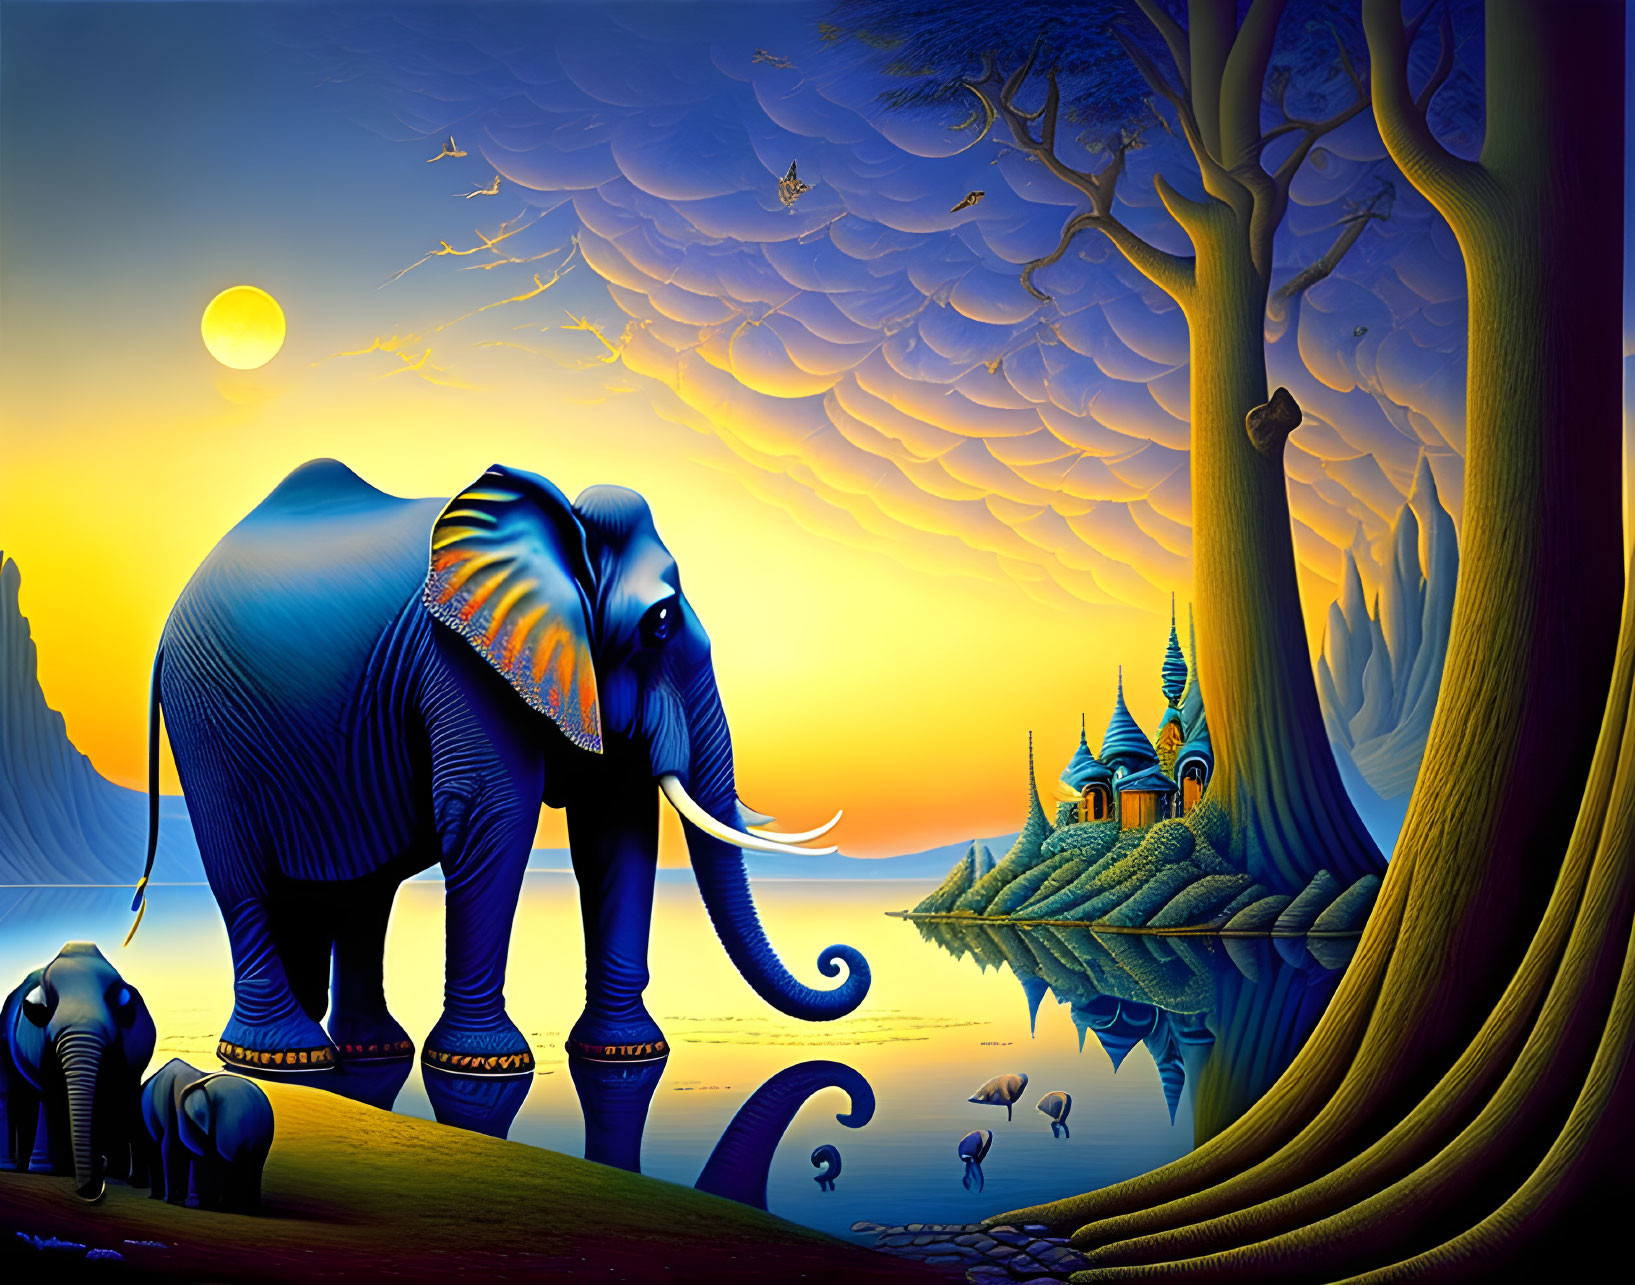 Colorful artwork featuring elephants by water with whimsical trees and stylized buildings under orange sky